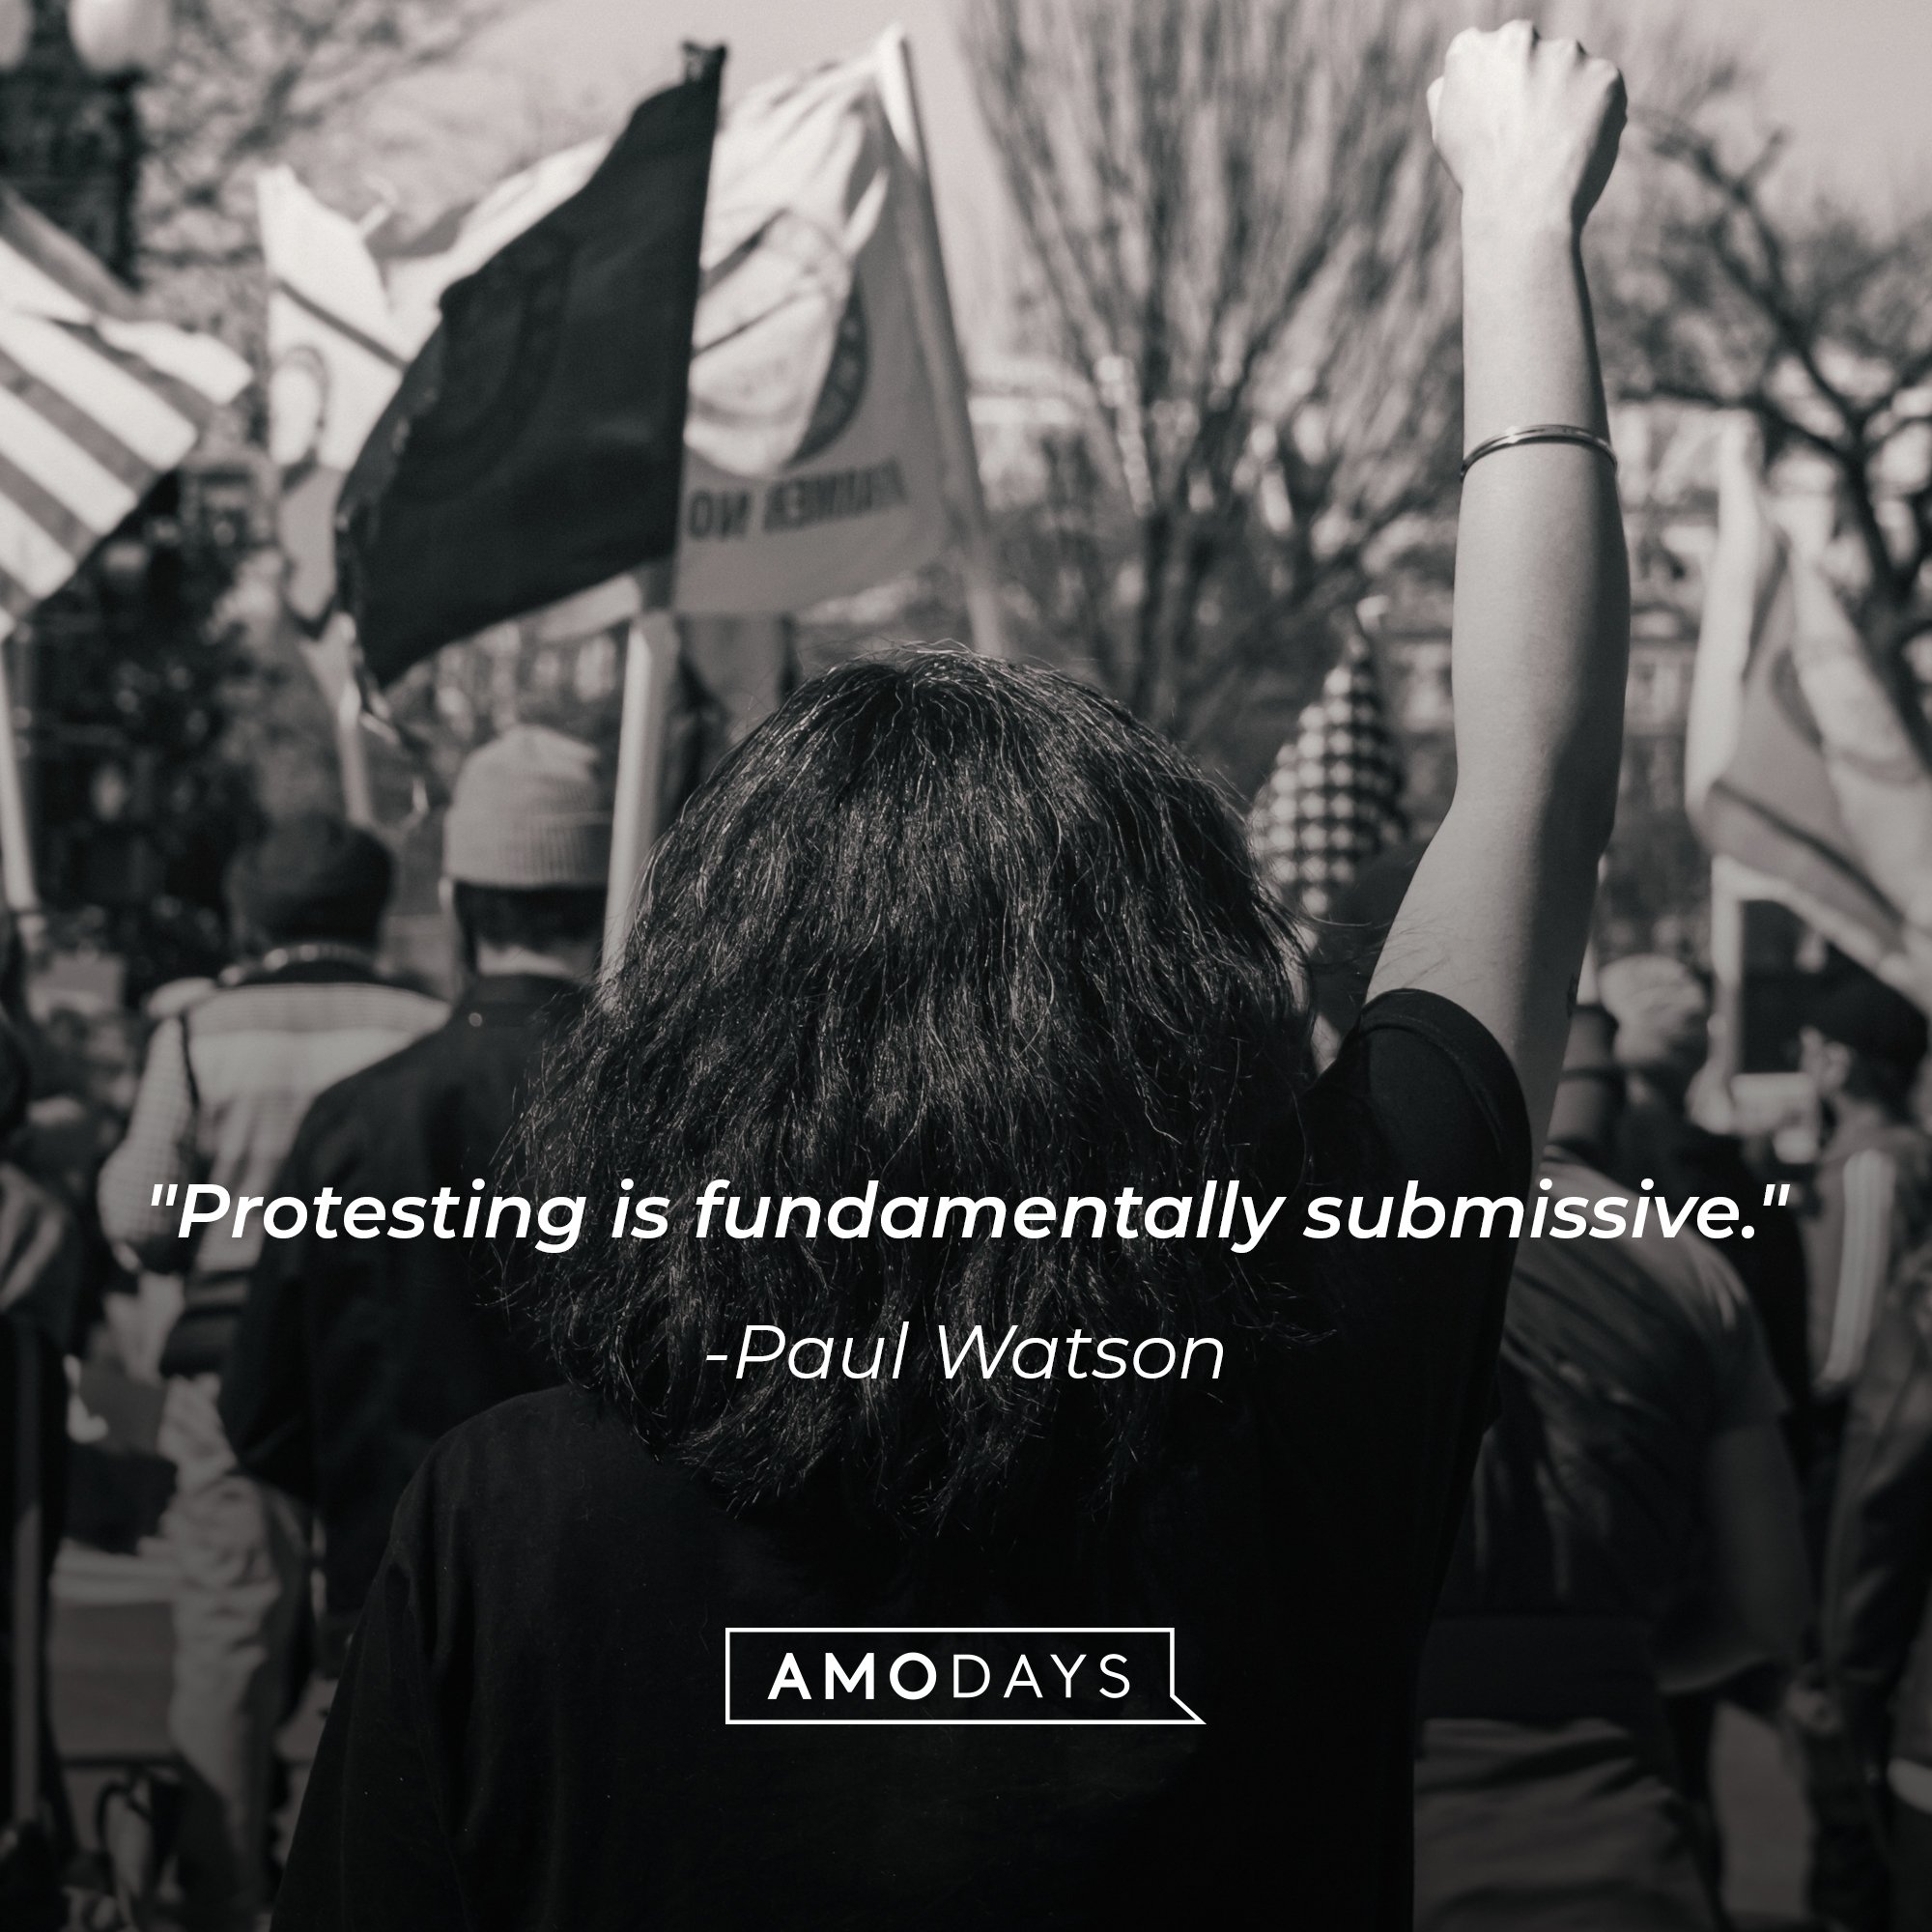  Paul Watson’s quote: "Protesting is fundamentally submissive."  | Image: AmoDays